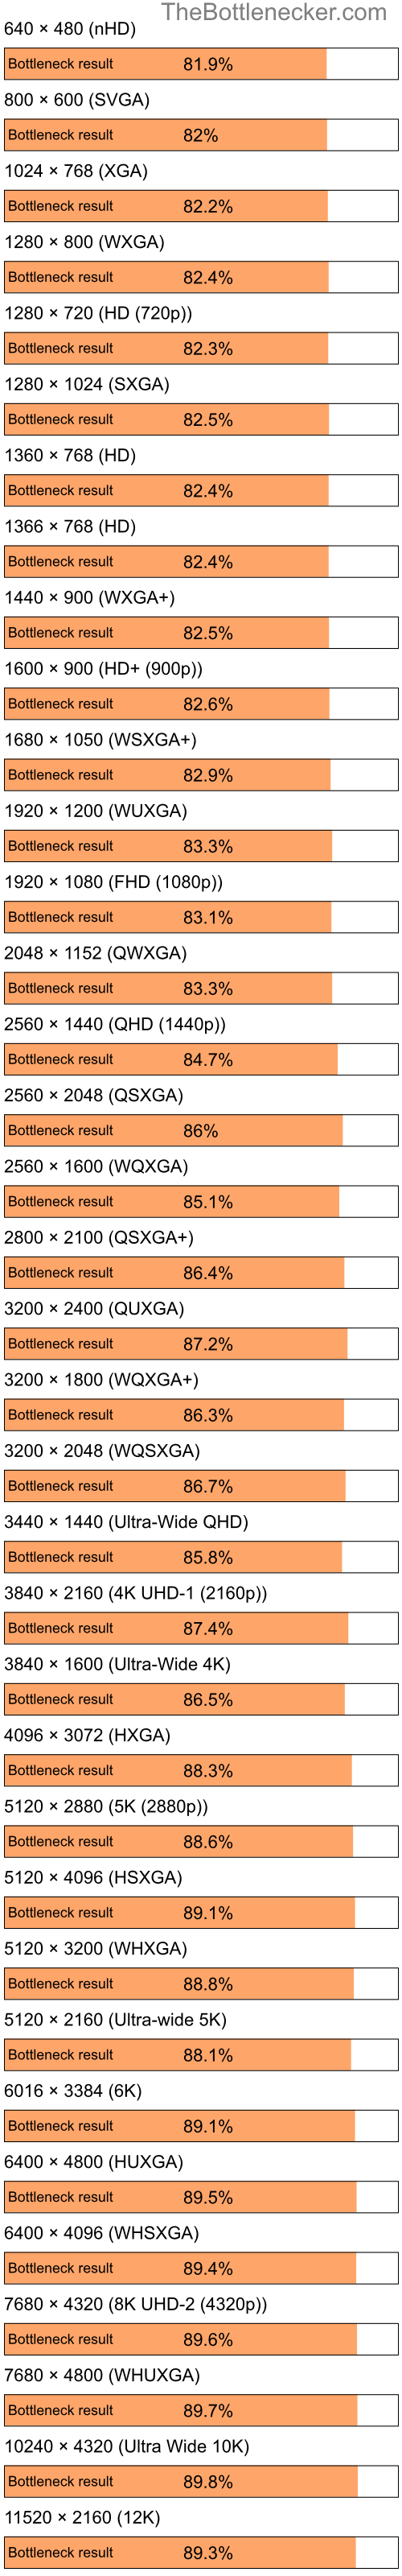 Bottleneck results by resolution for Intel Pentium 4 and NVIDIA GeForce 6150SE in Graphic Card Intense Tasks